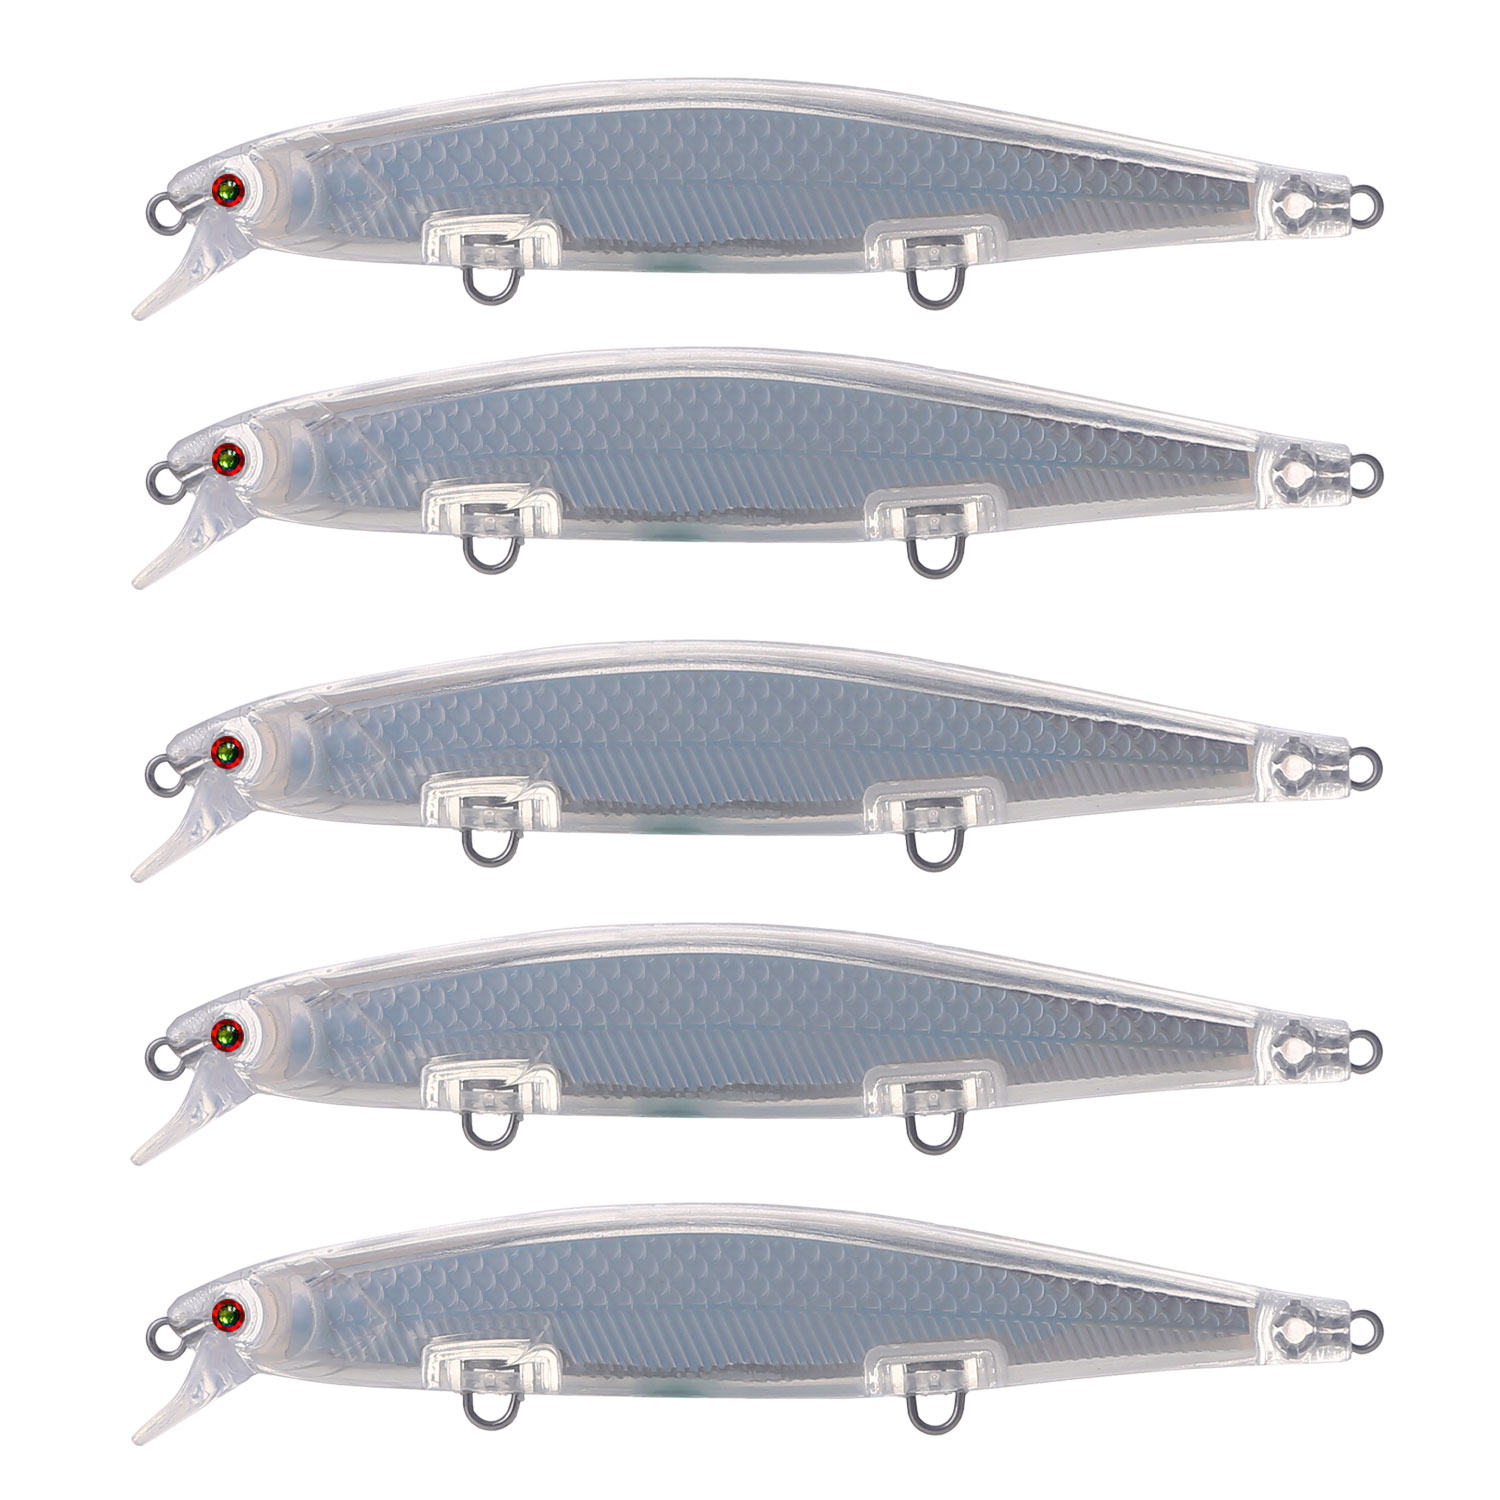 Fishing Unpainted Lures Set 11.4cm 11.4g Long Laser Long Fish Minnows Clear Plastic Bait Embryo DIY Blank Fishbaits for Pike